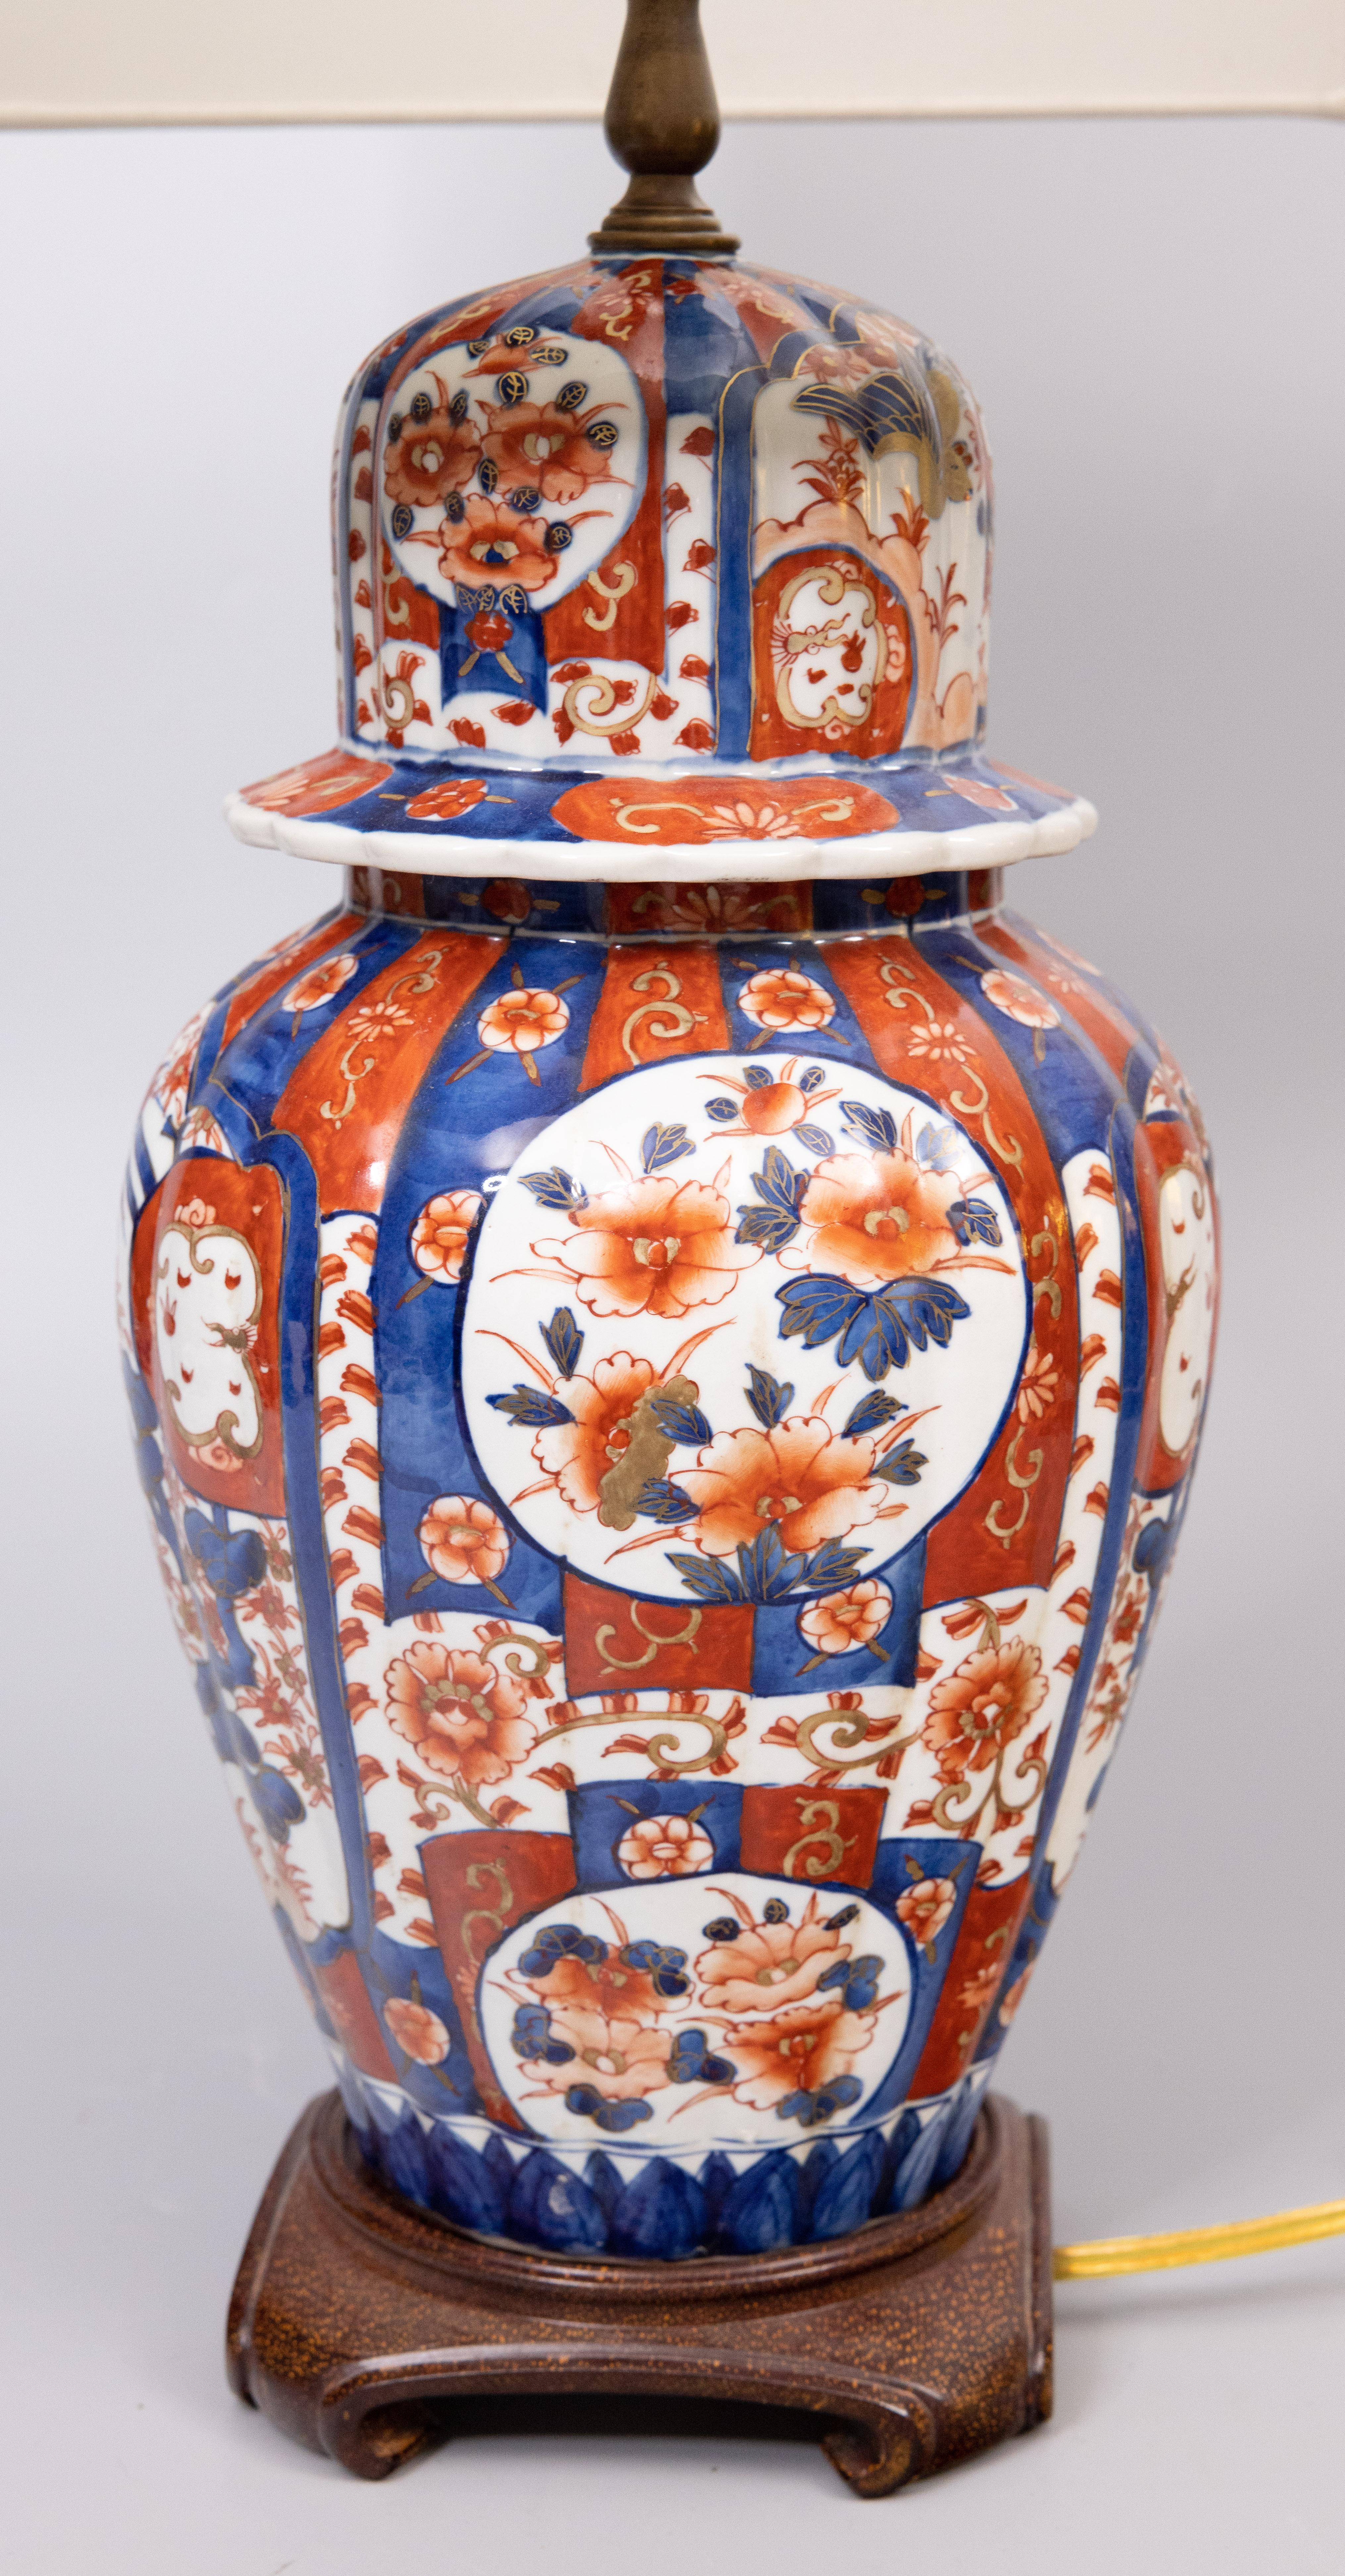 A gorgeous antique Japanese Imari lidded vase or ginger jar lamp mounted on a hardwood base, circa 1900. This fine vase is a nice large size and has a lovely ribbed shape and hand painted birds and floral design in the traditional Imari colors. It